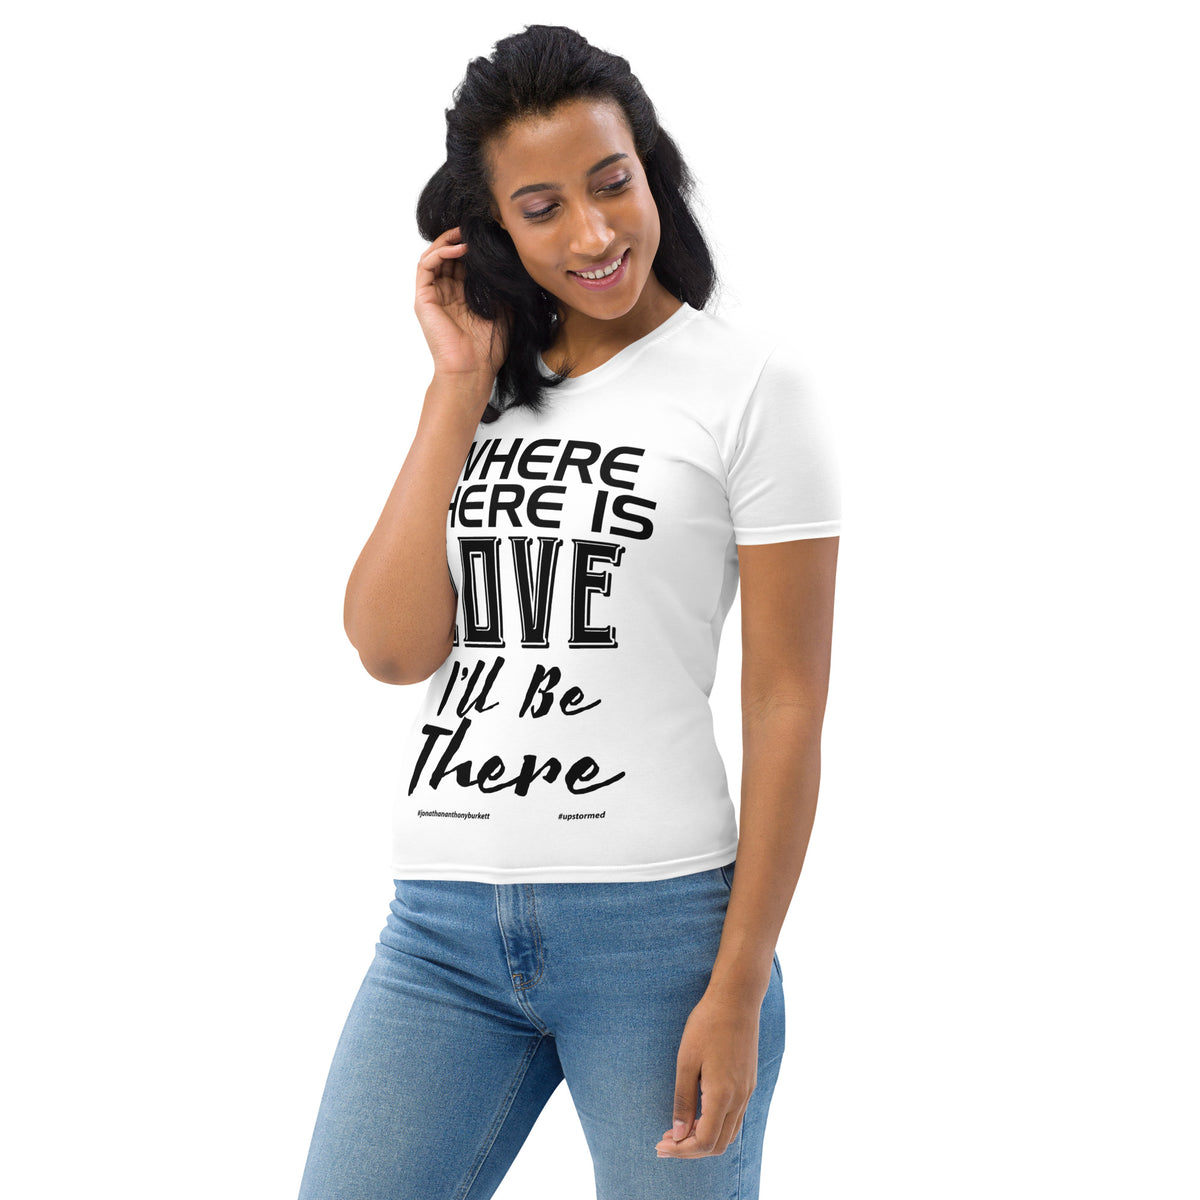 Where There Is Love I'll Be There Women's T-Shirt